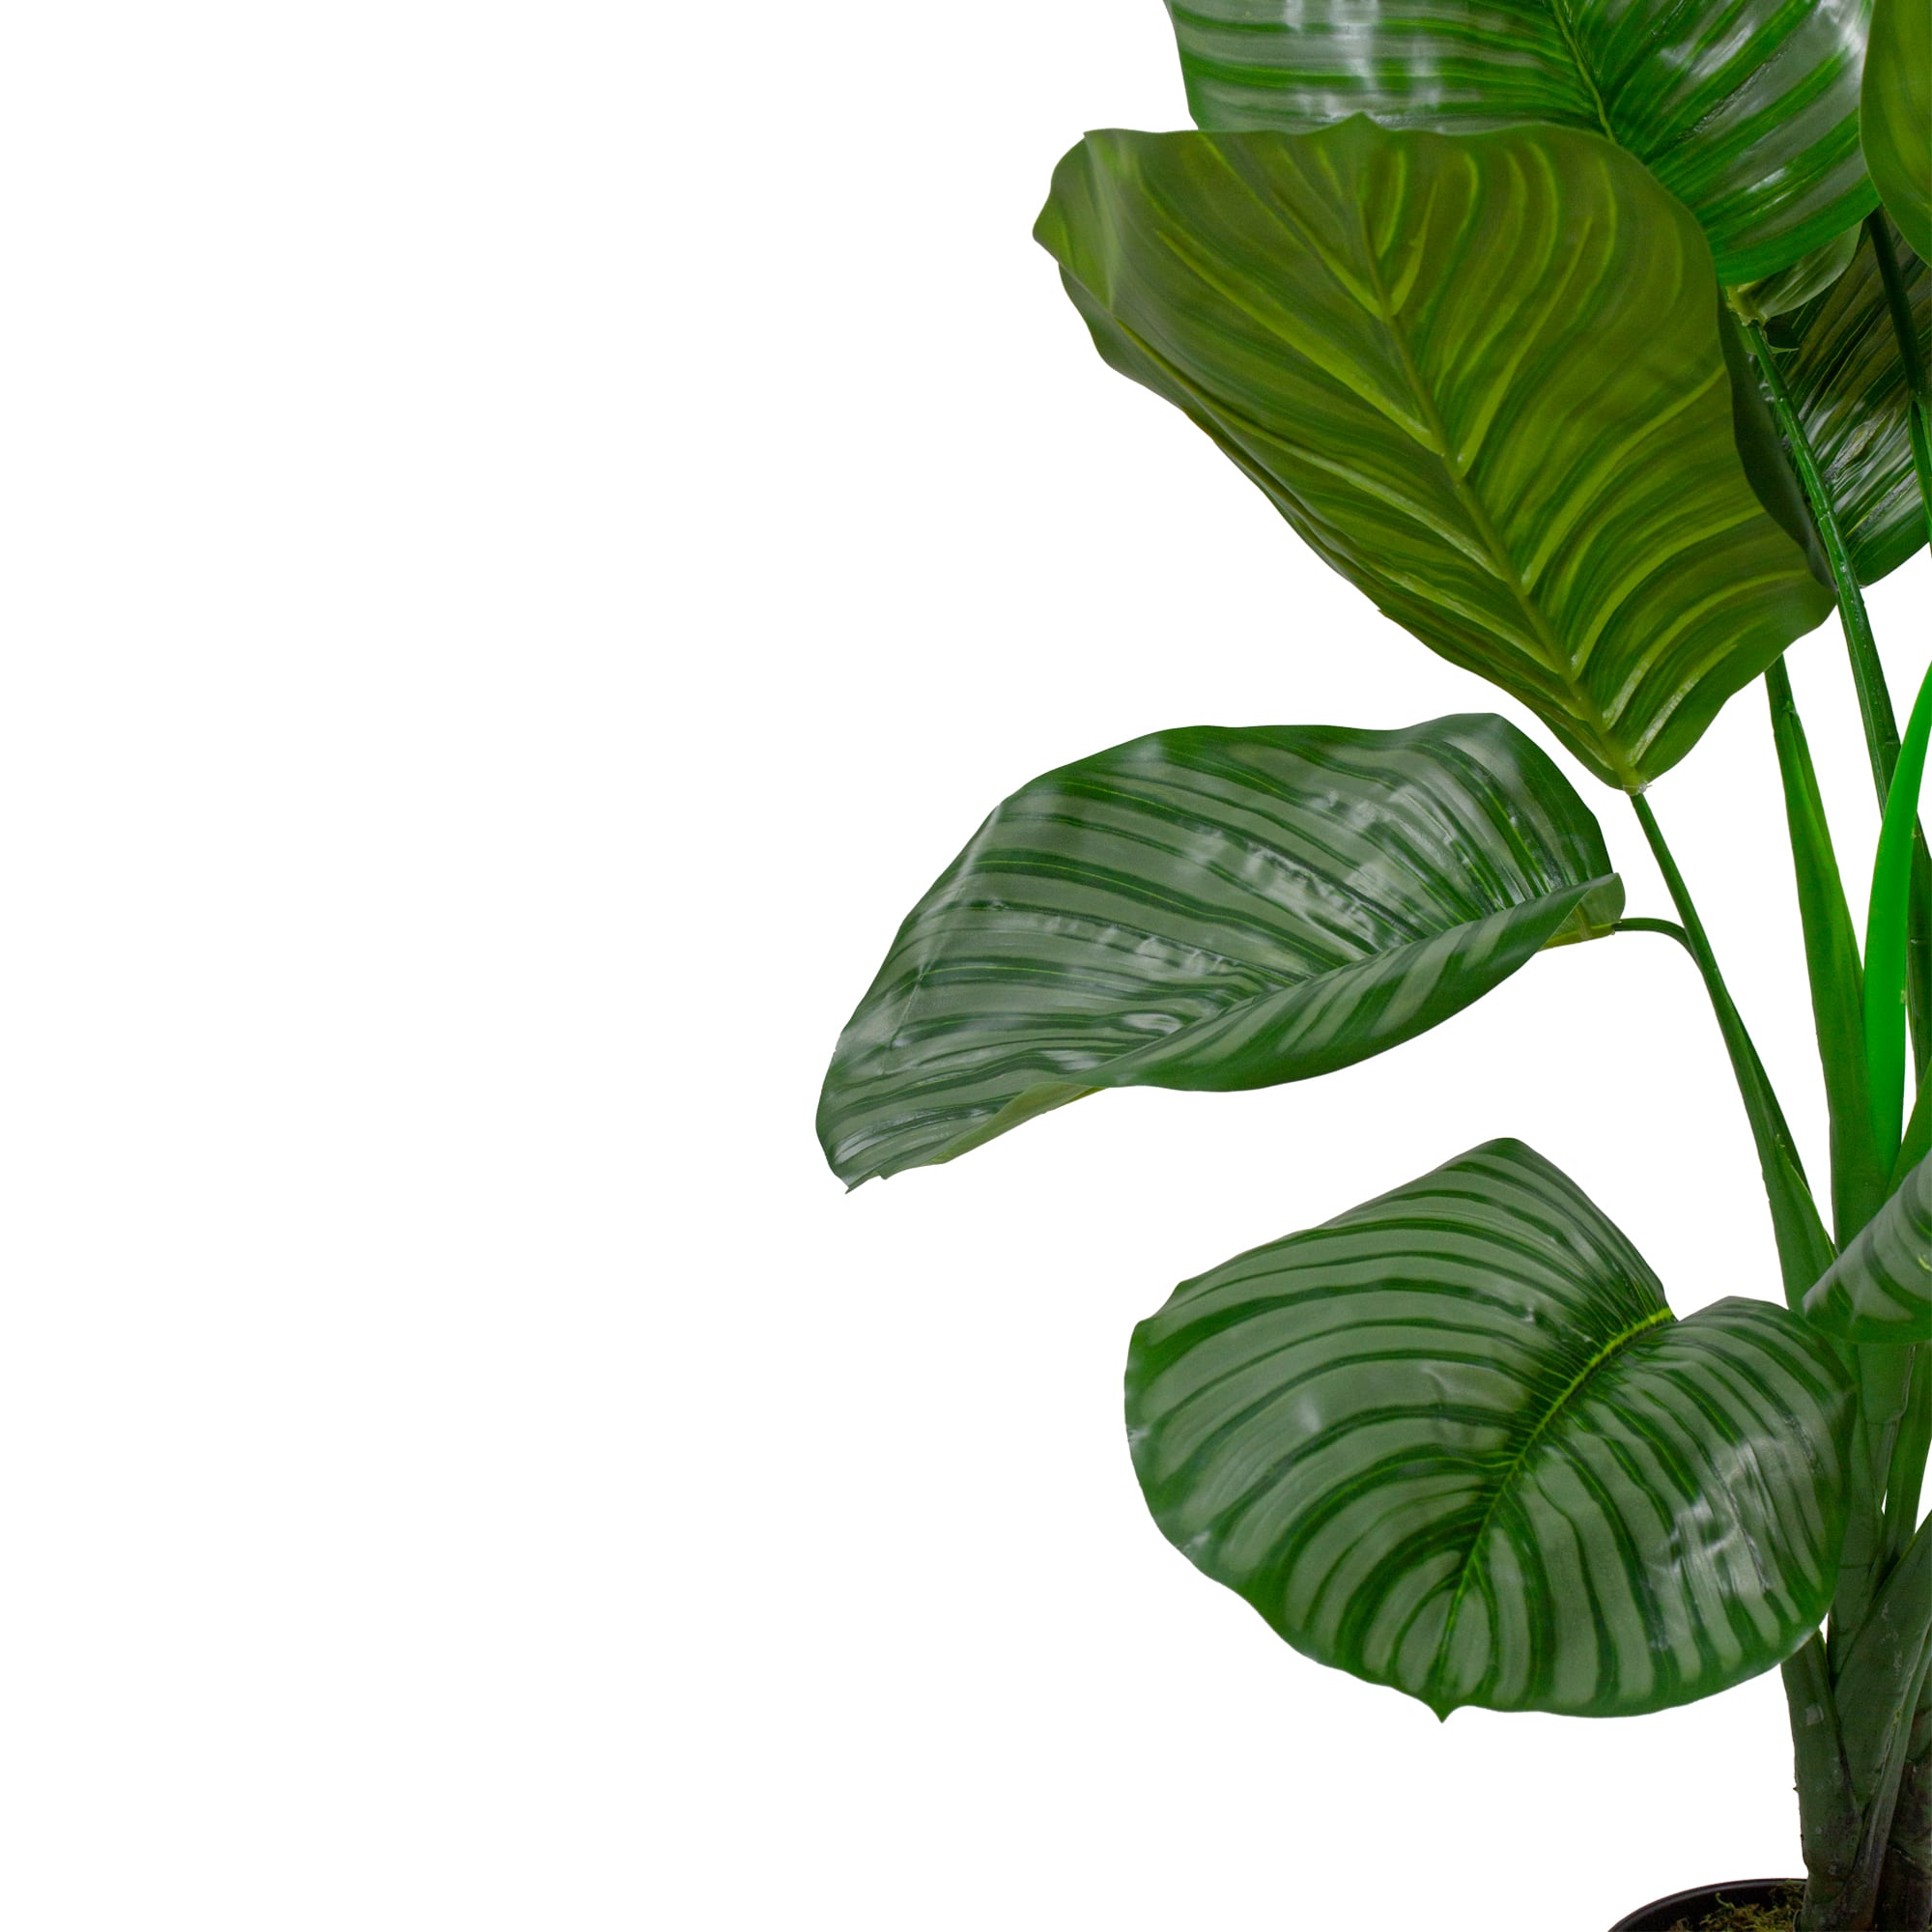 4ft. Potted Two Tone Green Calathea Floor Plant